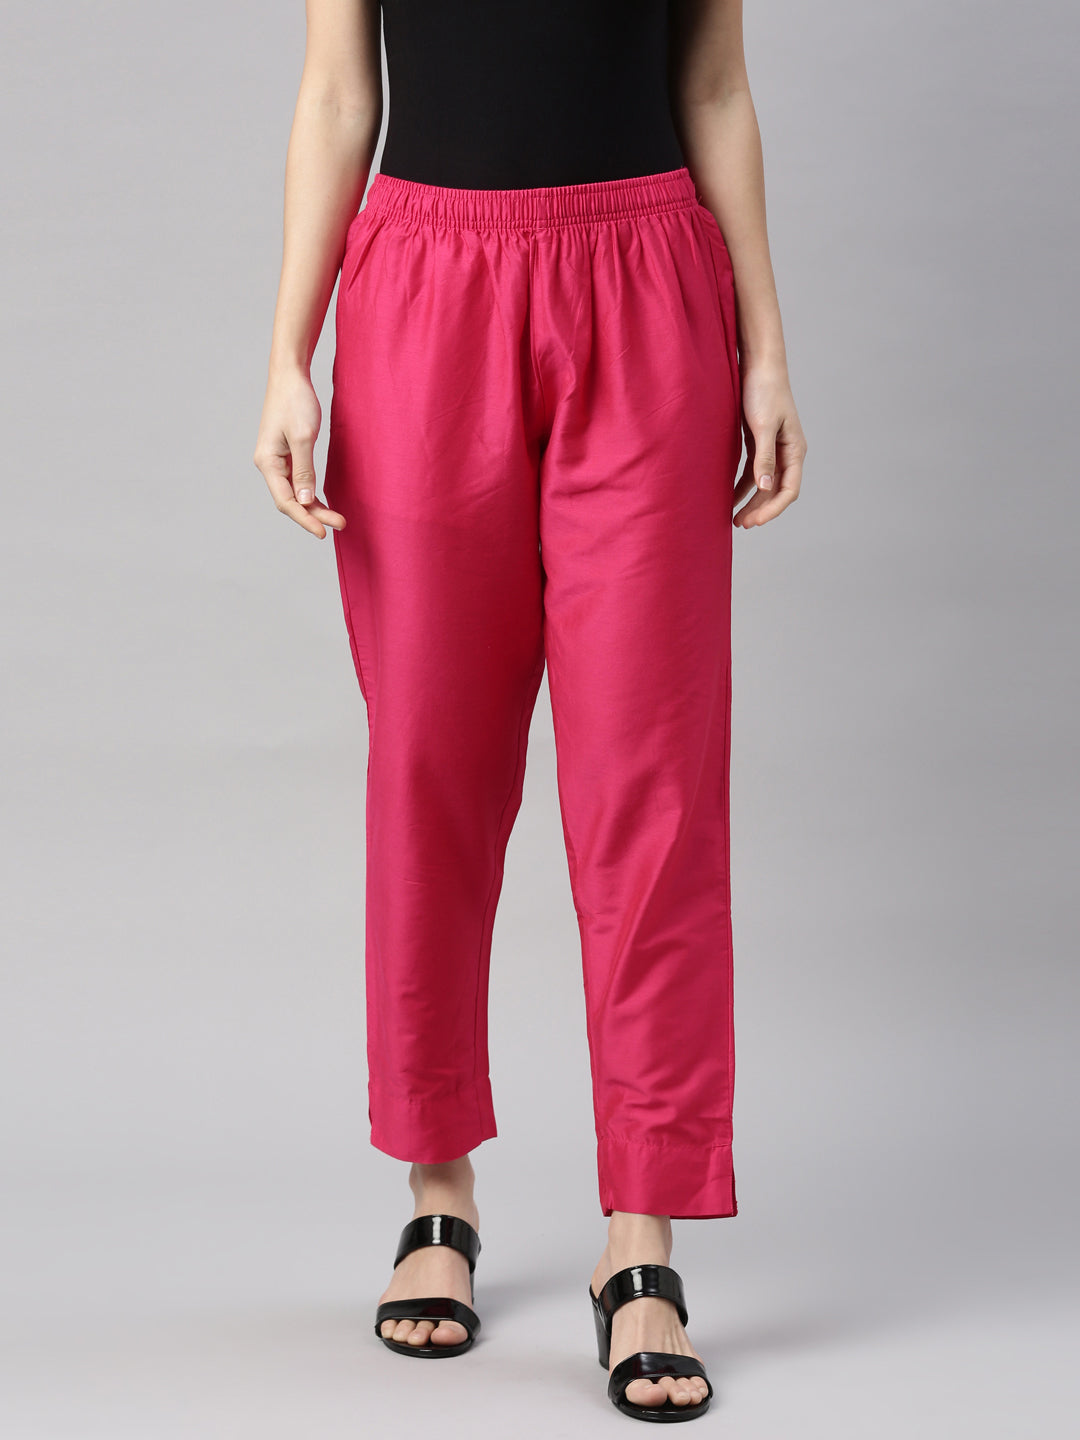 Go Colors Ethnic Bottoms  Go Colors Gold Metallic Pants Online  Nykaa  Fashion